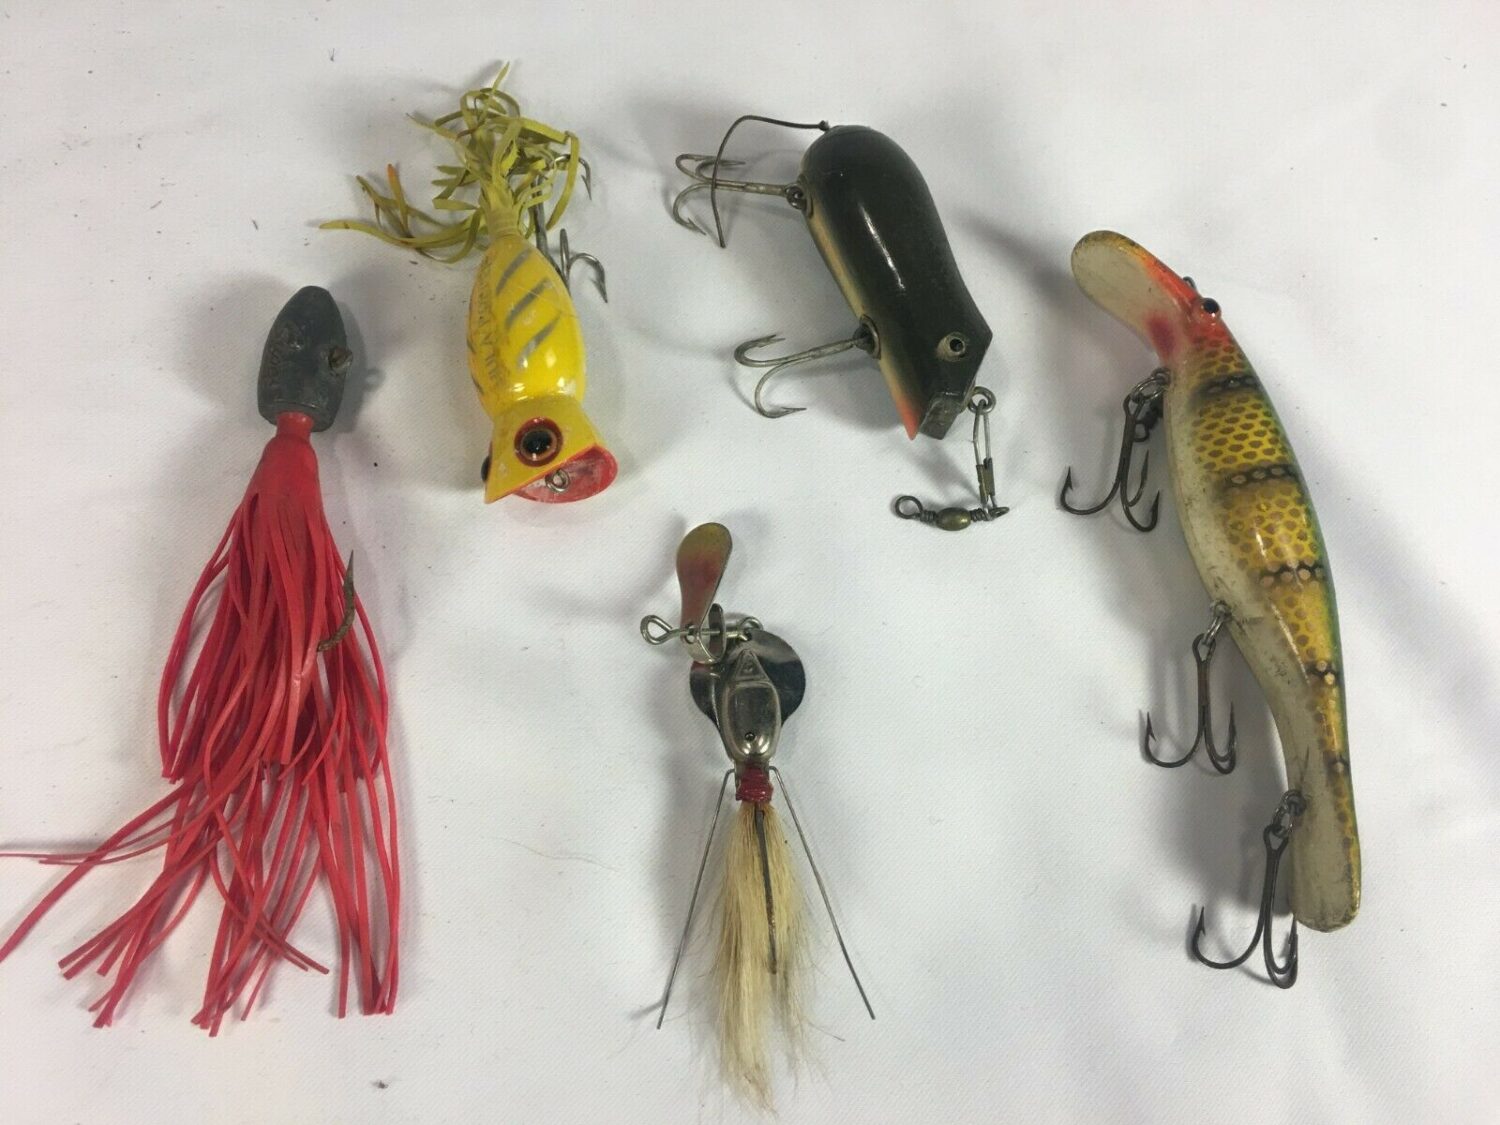 Nineteen Fishing Lures Including Shakespeare.